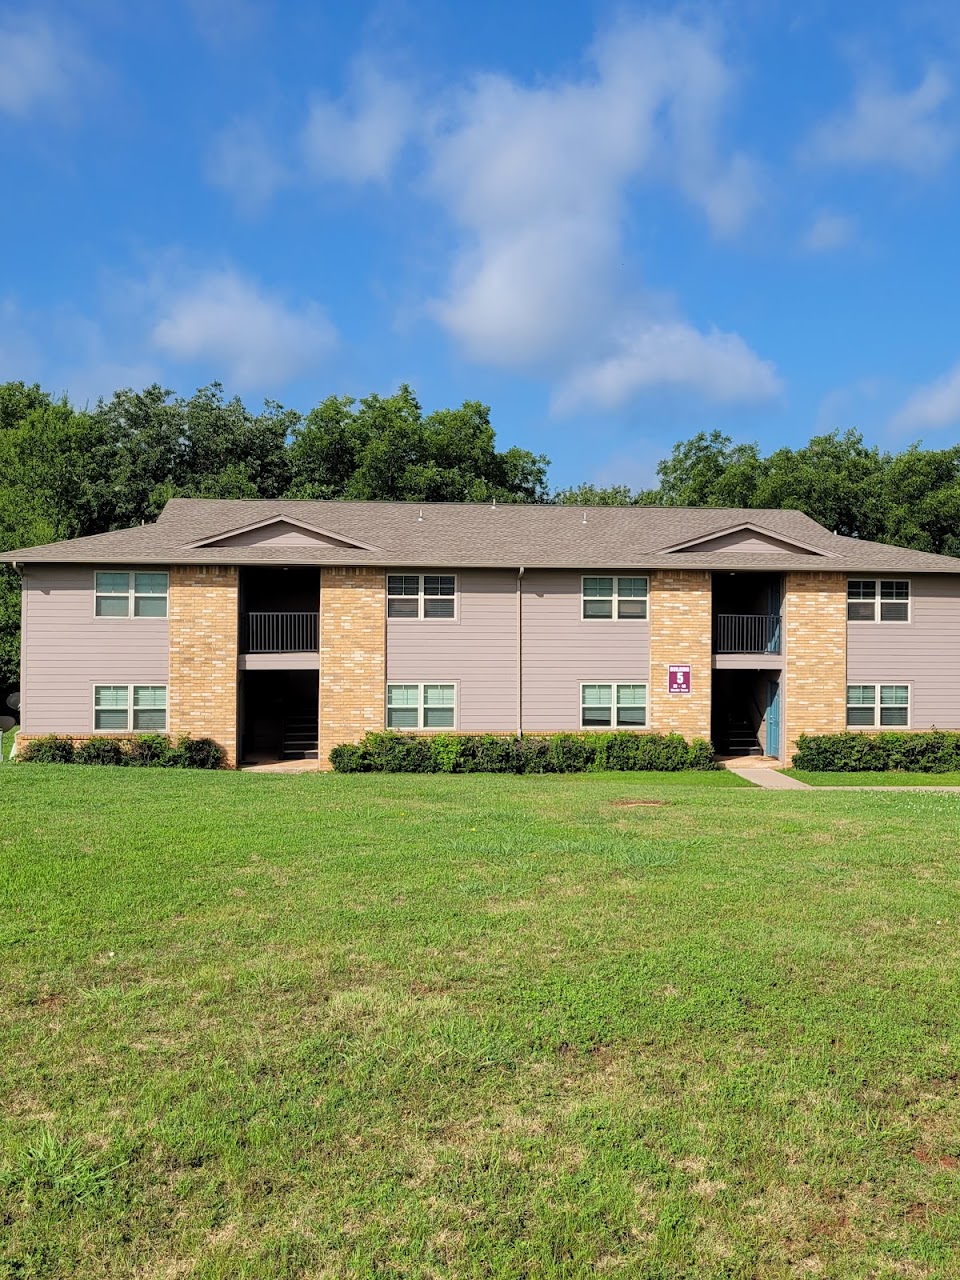 Photo of CHANDLER PLACE APTS. Affordable housing located at 600 BRANDON RD CHANDLER, OK 74834